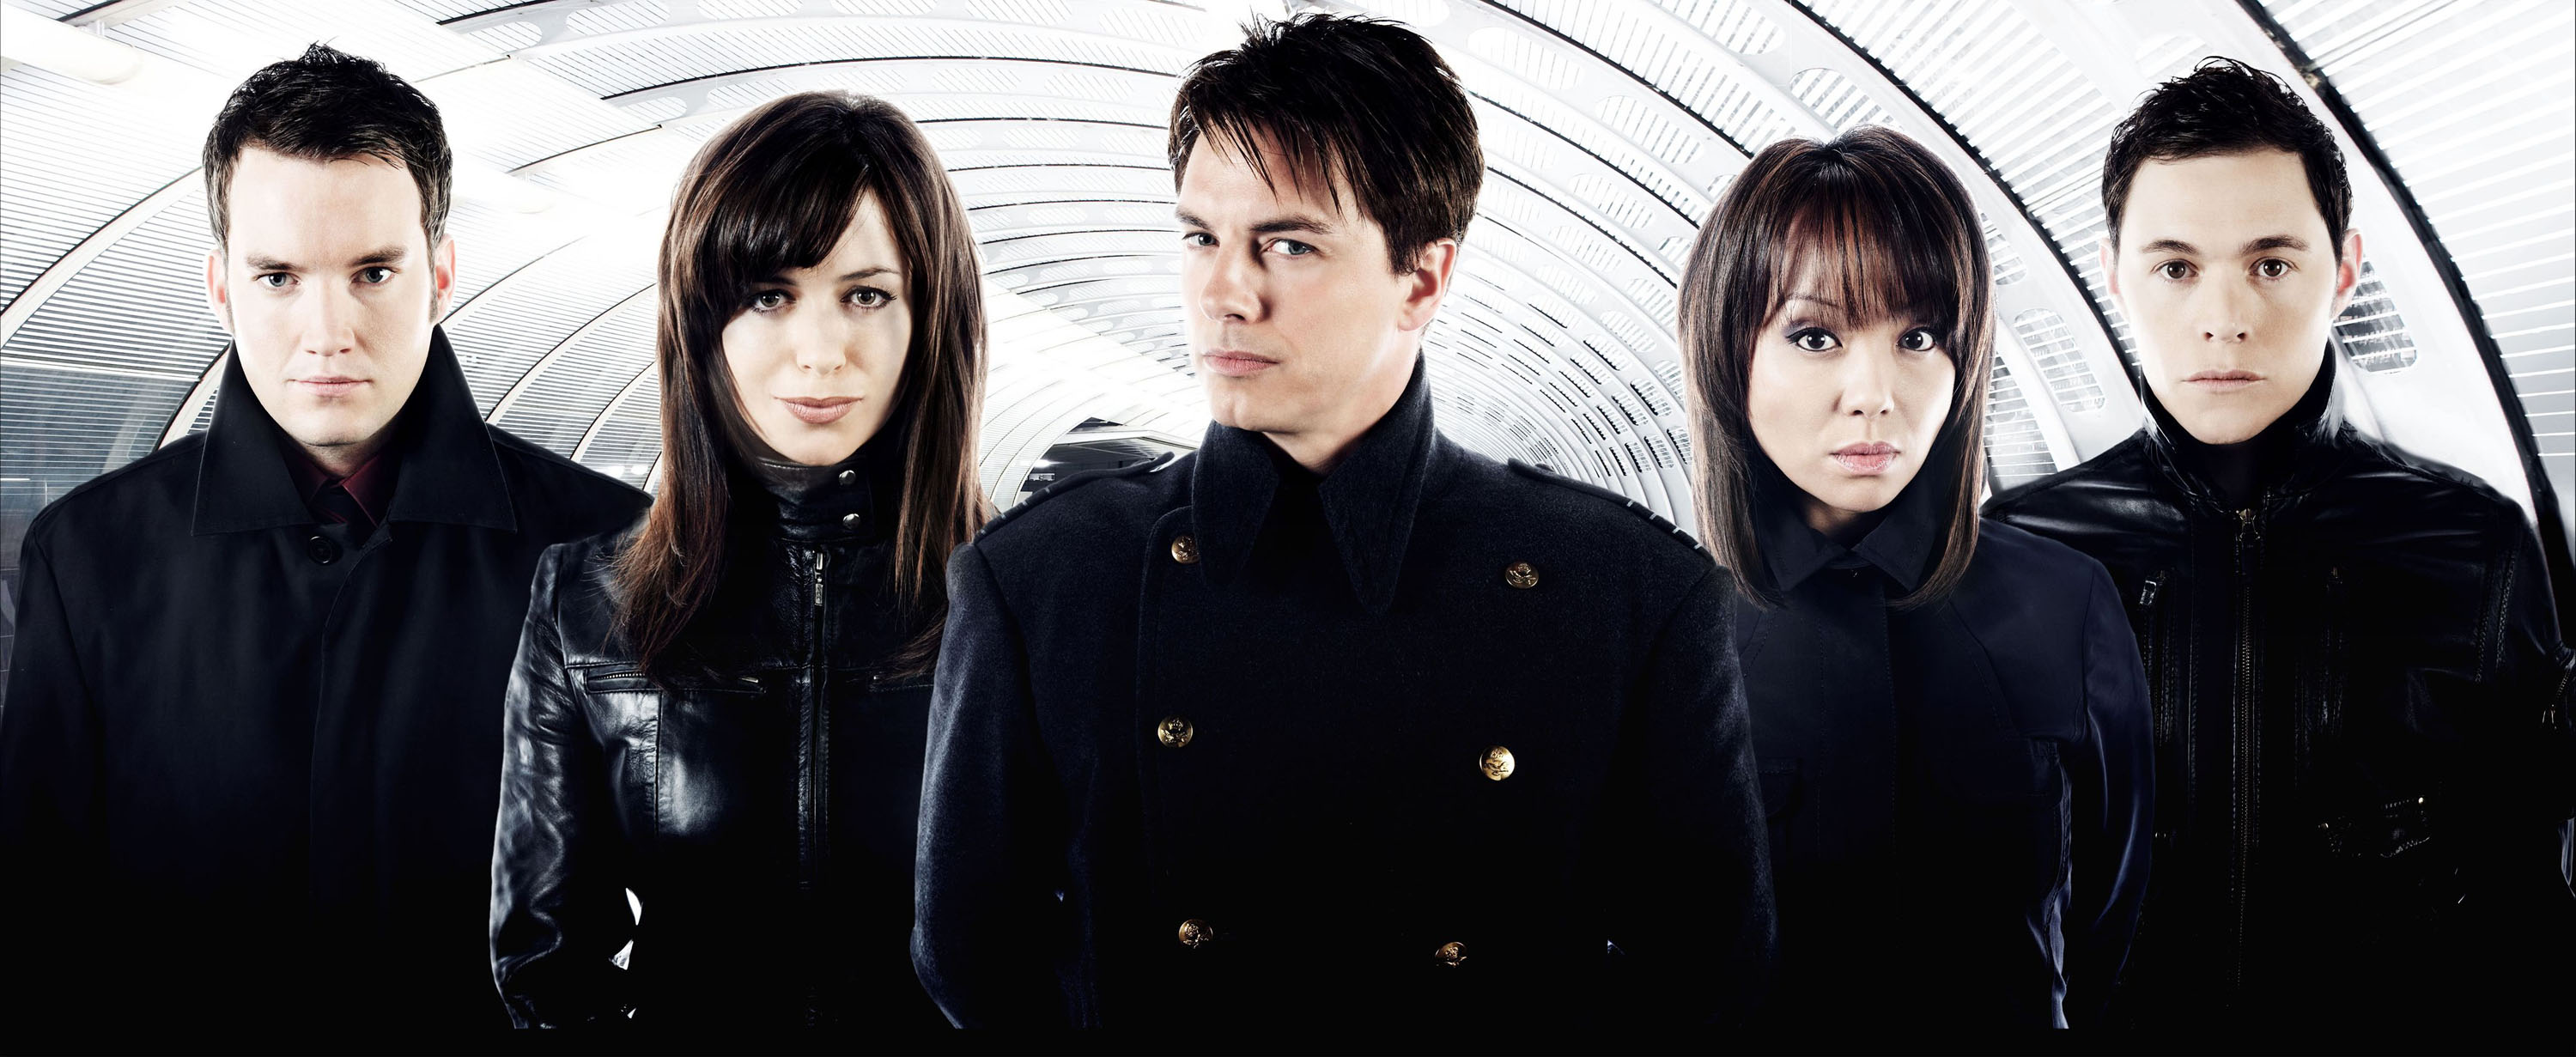 HQ Torchwood Wallpapers | File 453.81Kb